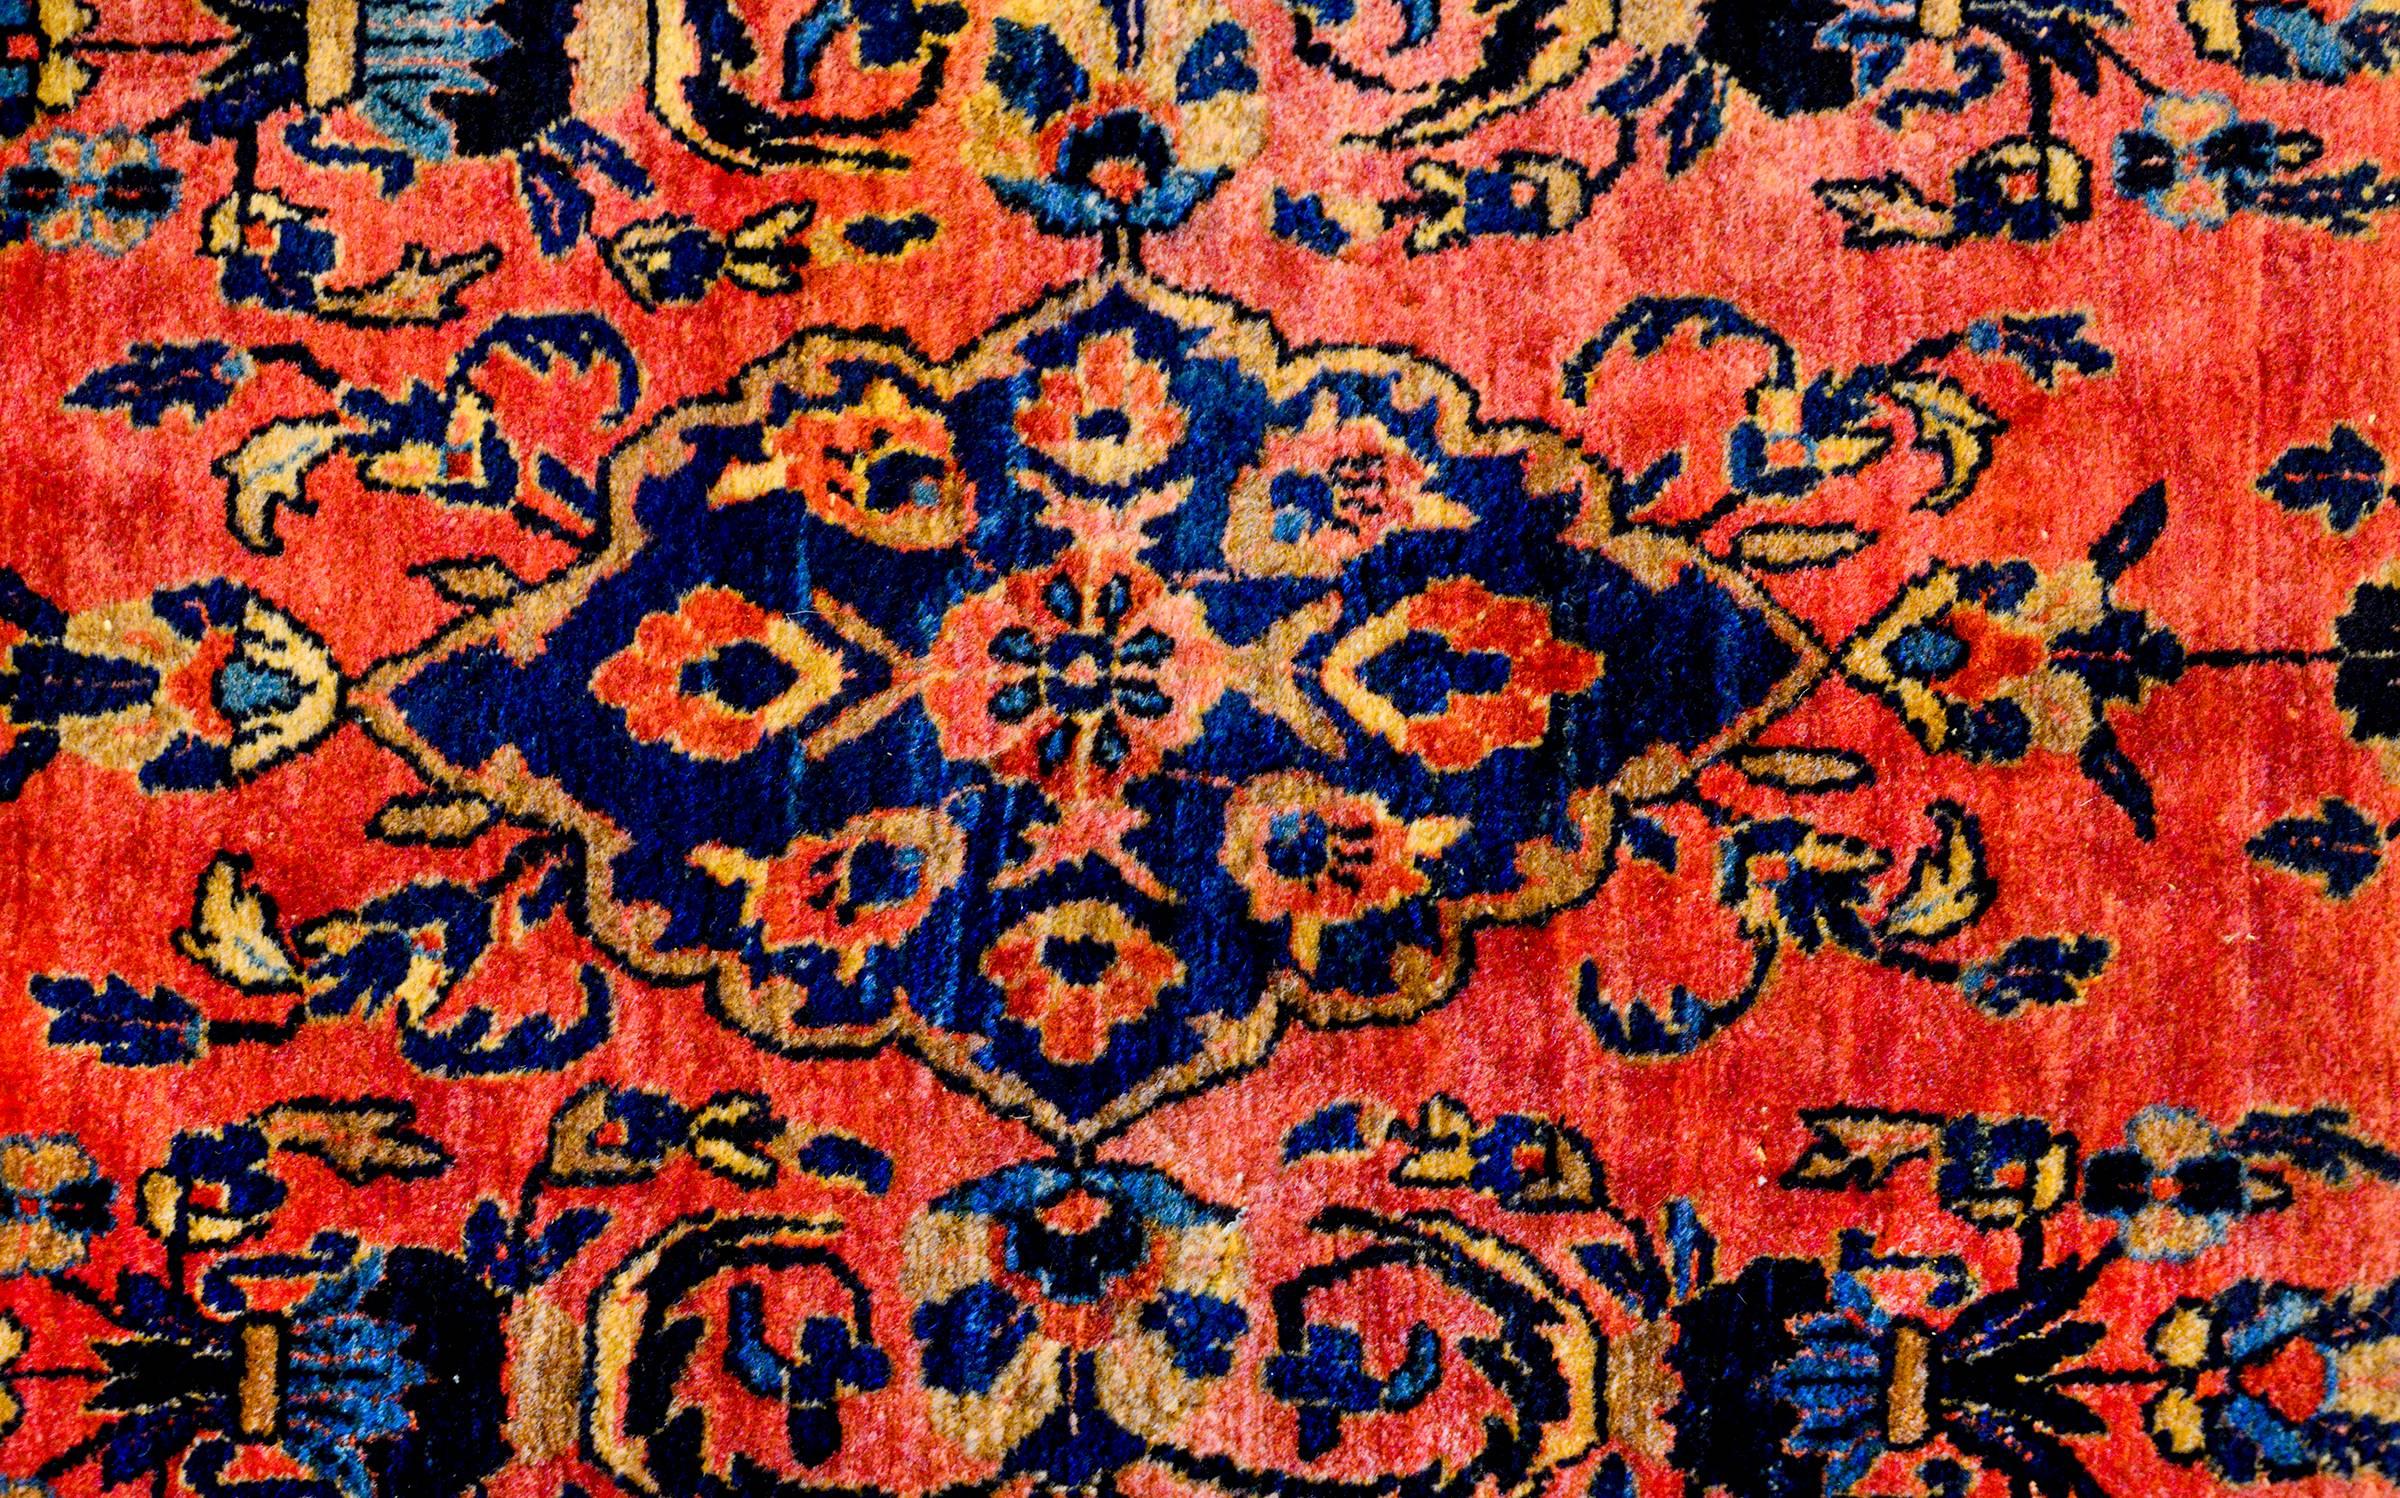 An exceptional early 20th century Persian Sarouk Mohajeran Runner with a beautiful mirrored floral and vine pattern woven in light and dark indigo, and cream colored wool, on a beautiful rich coral background. The border is wonderfully rendered with